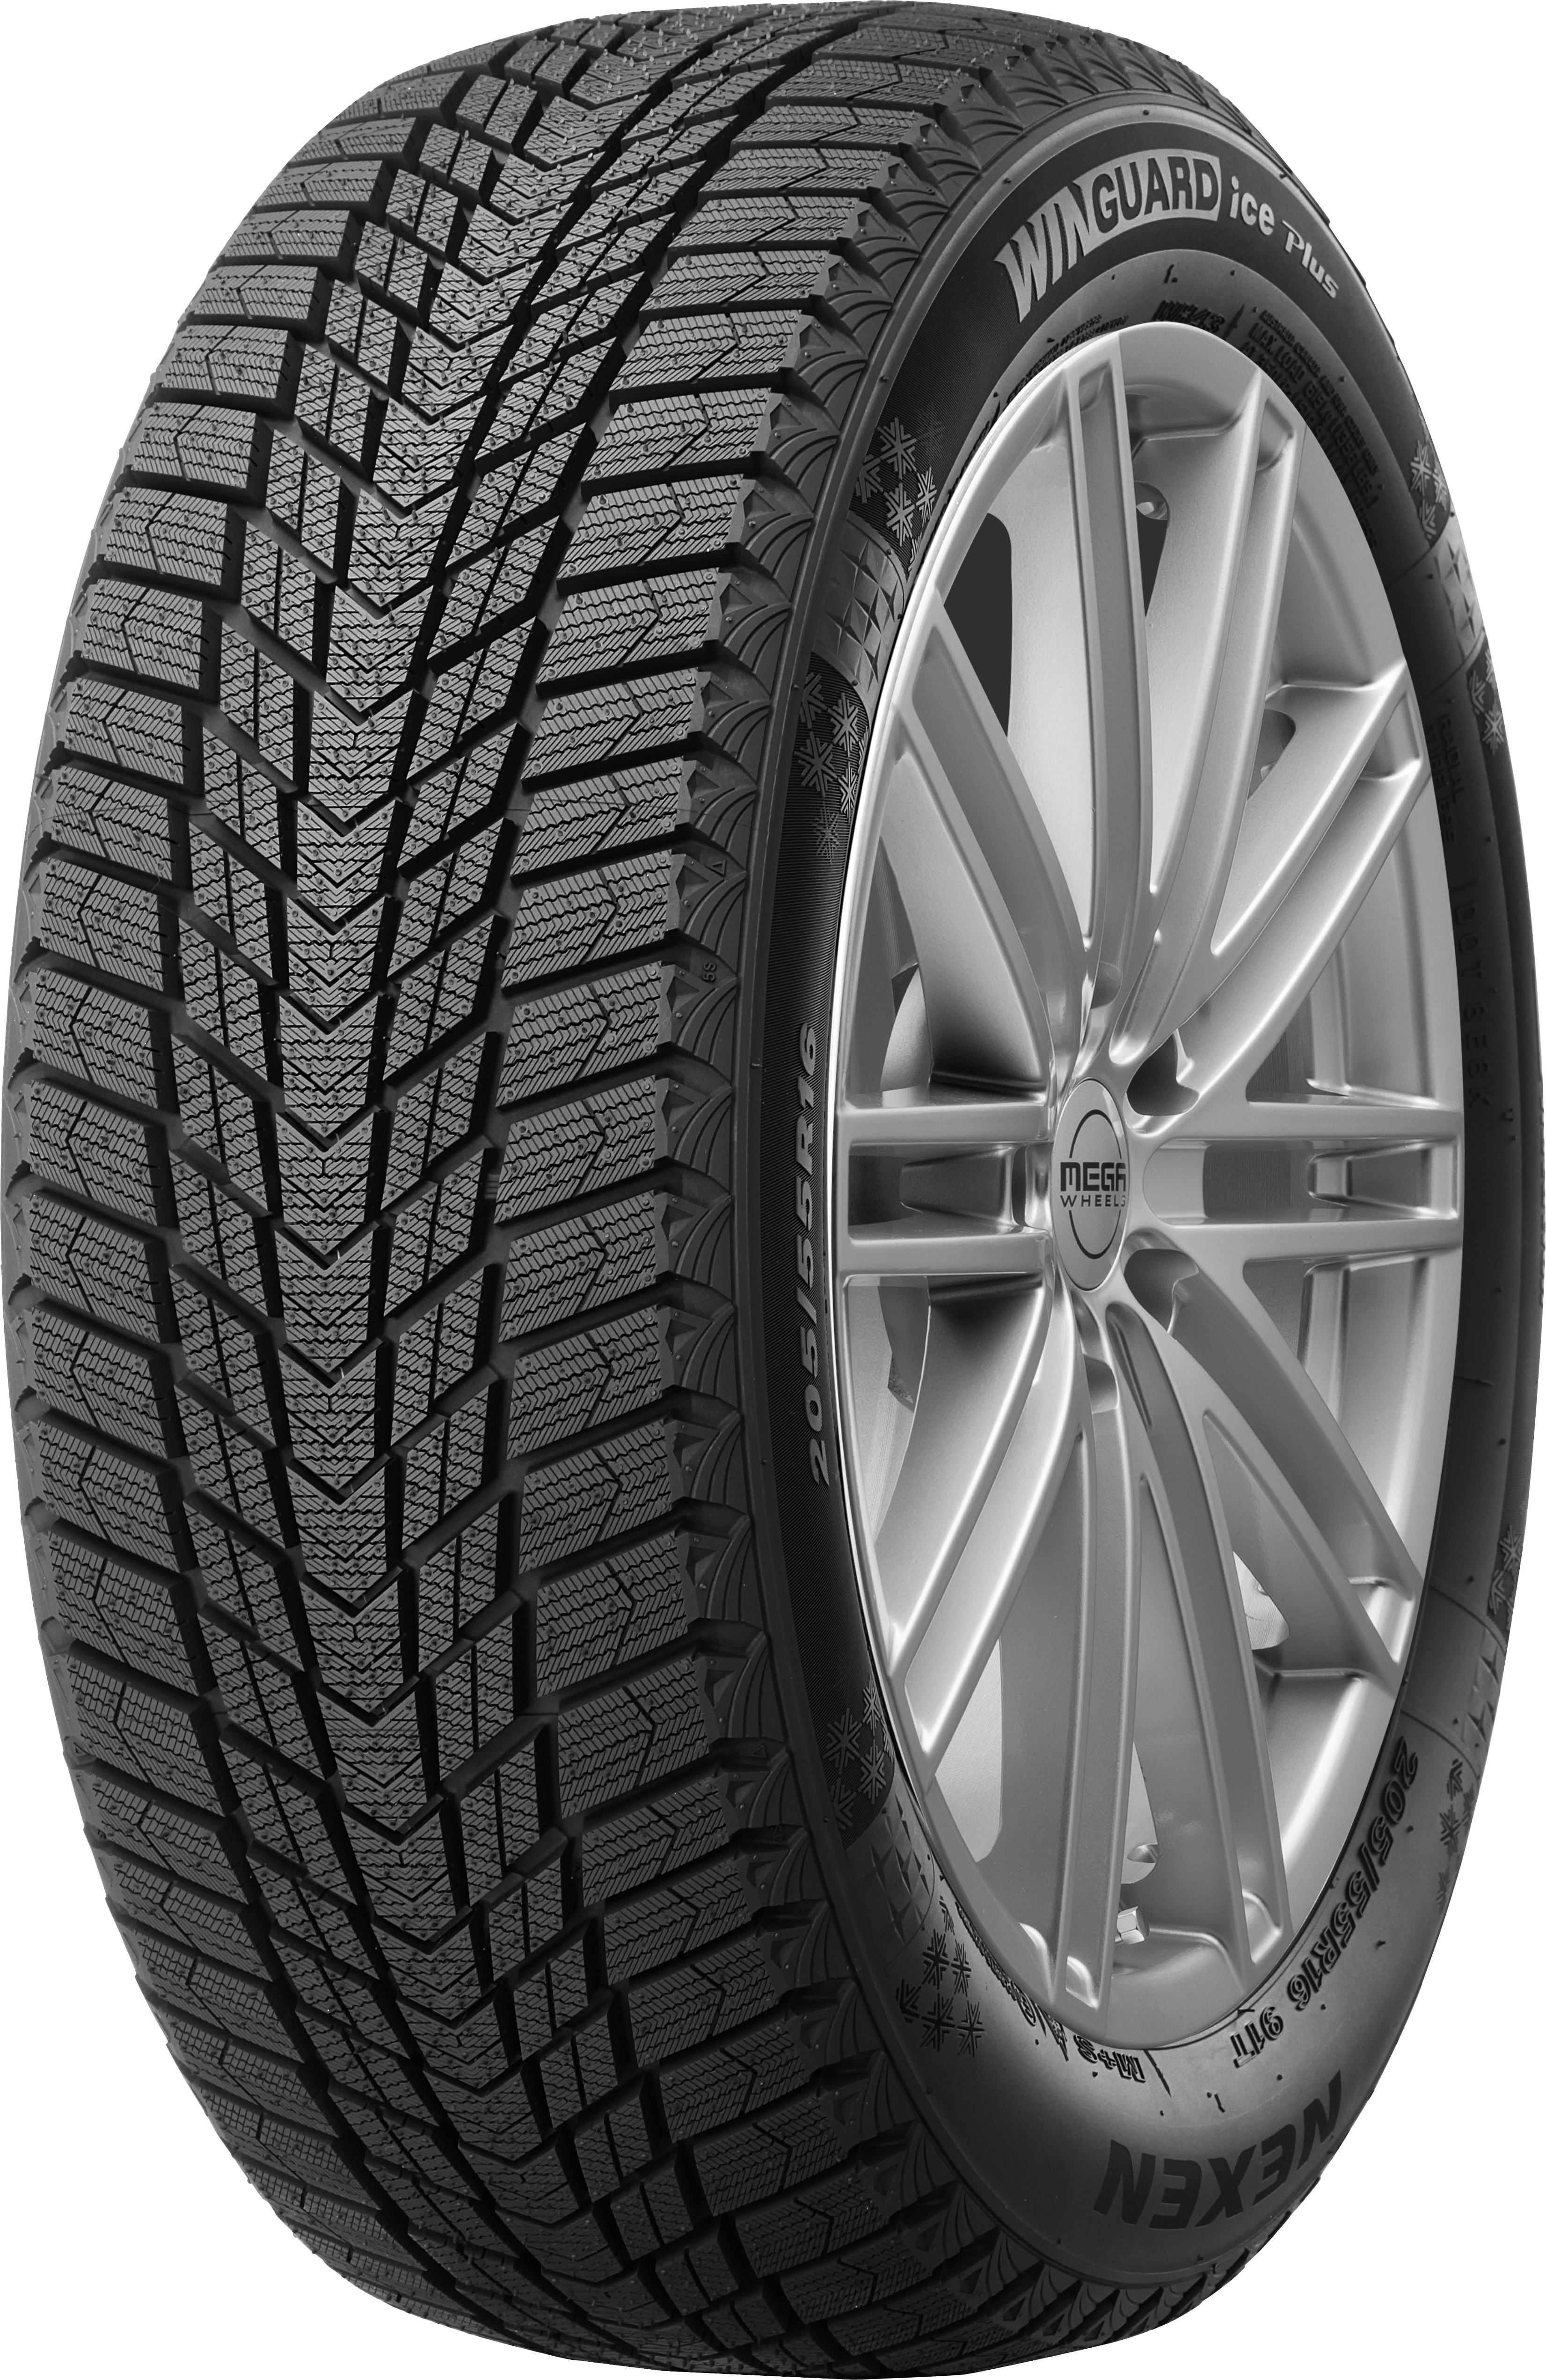 Nexen Winguard Ice Plus WH43 - Tire Reviews and Tests